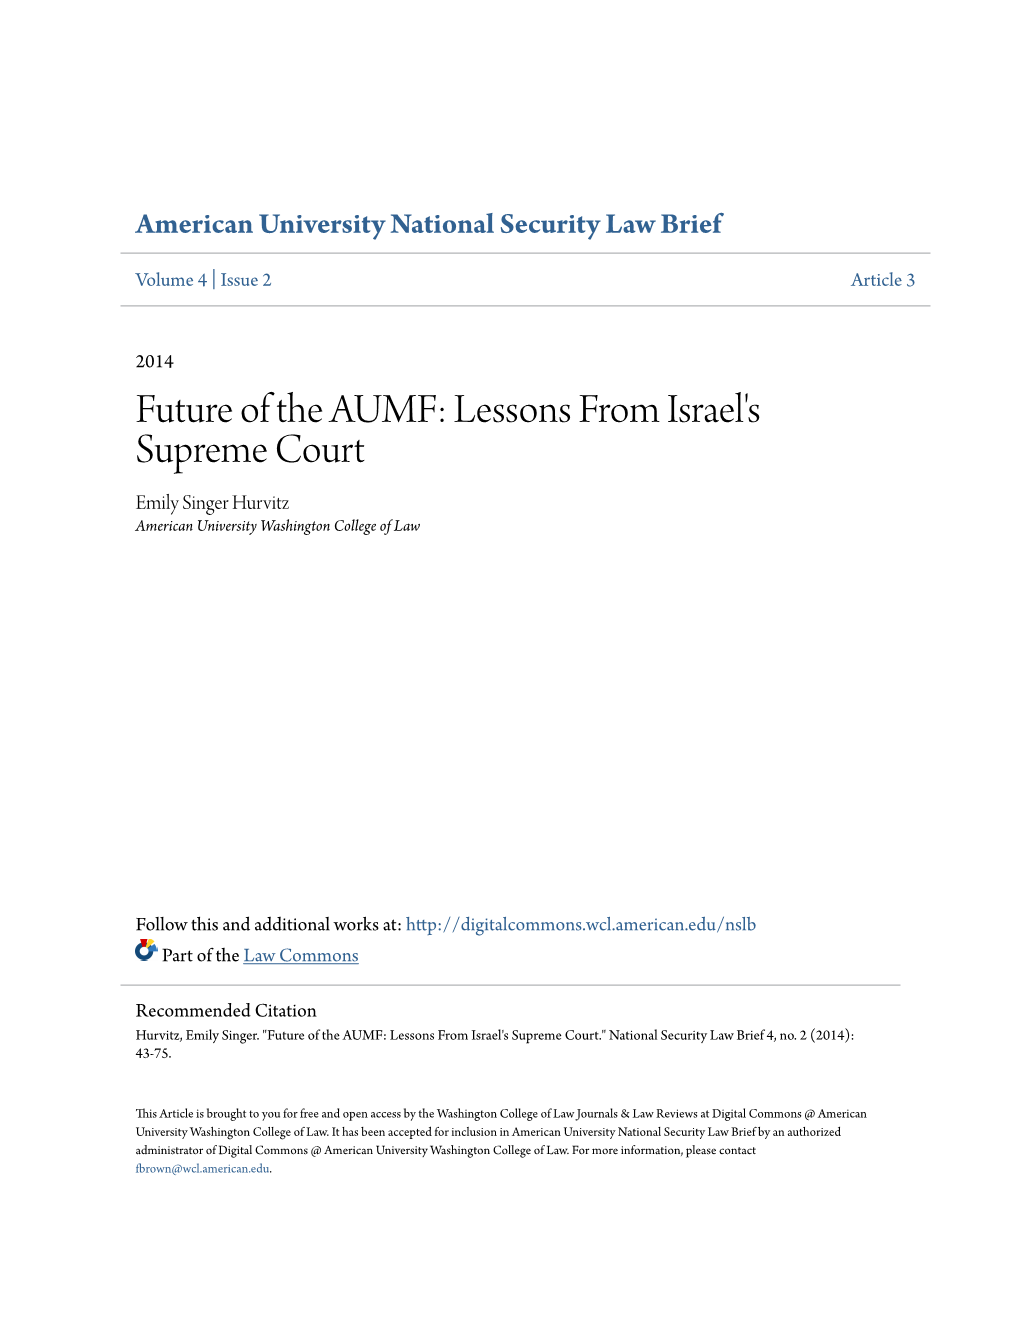 Future of the AUMF: Lessons from Israel's Supreme Court Emily Singer Hurvitz American University Washington College of Law